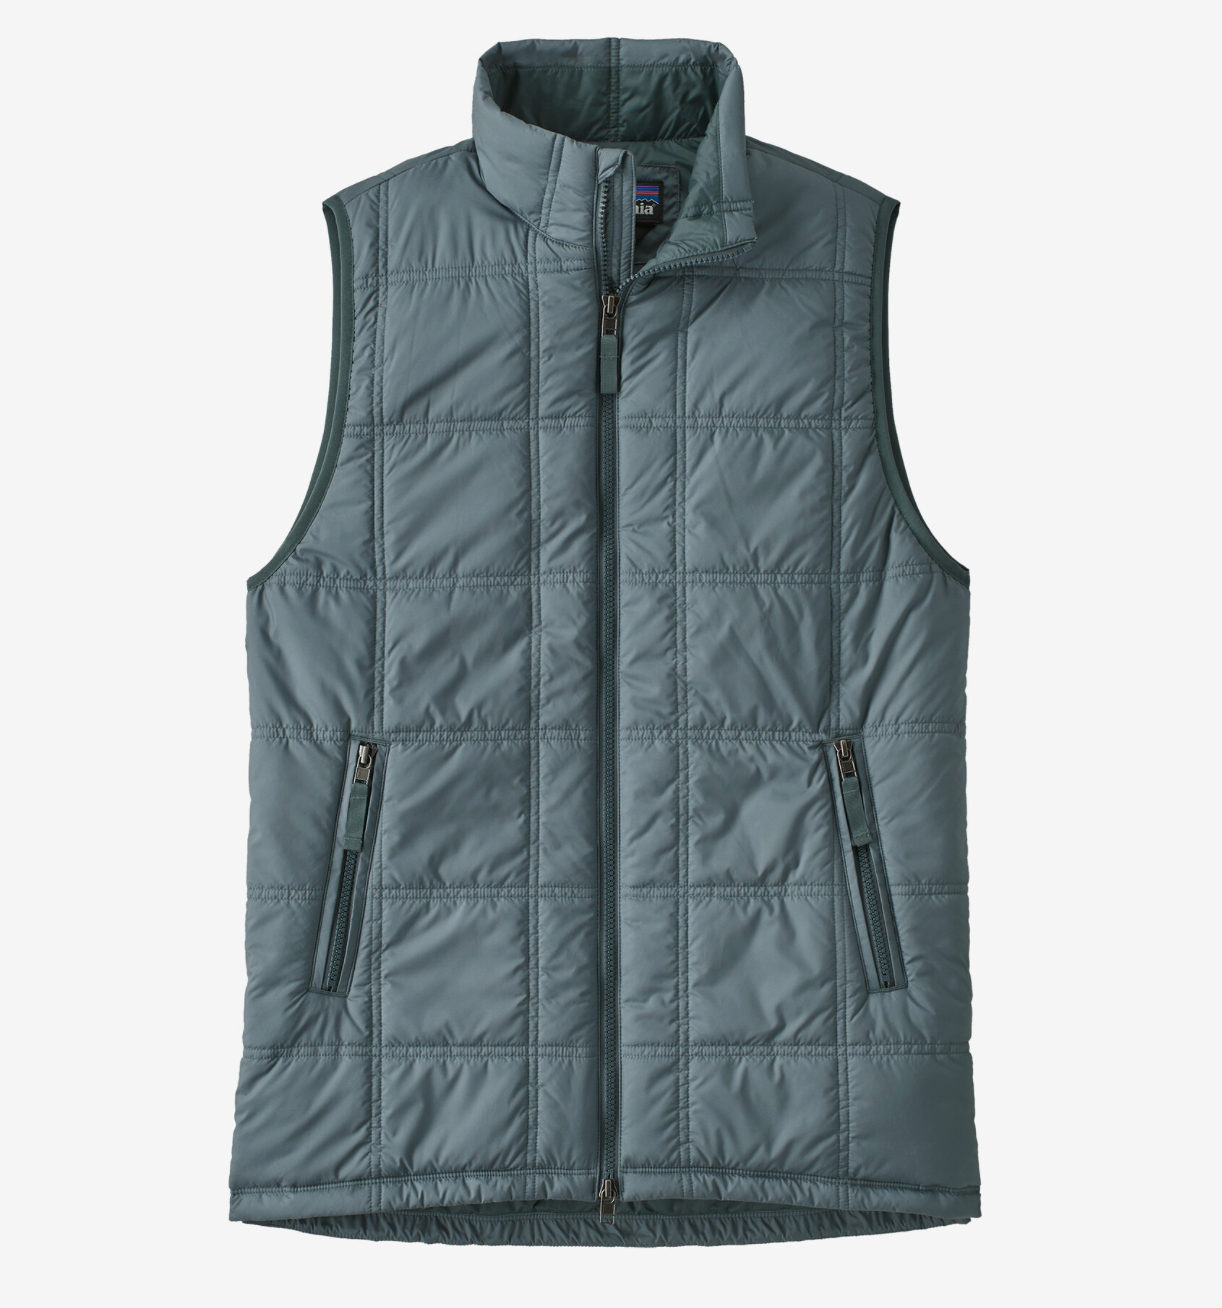 PATAGONIA LOST CANYON VEST